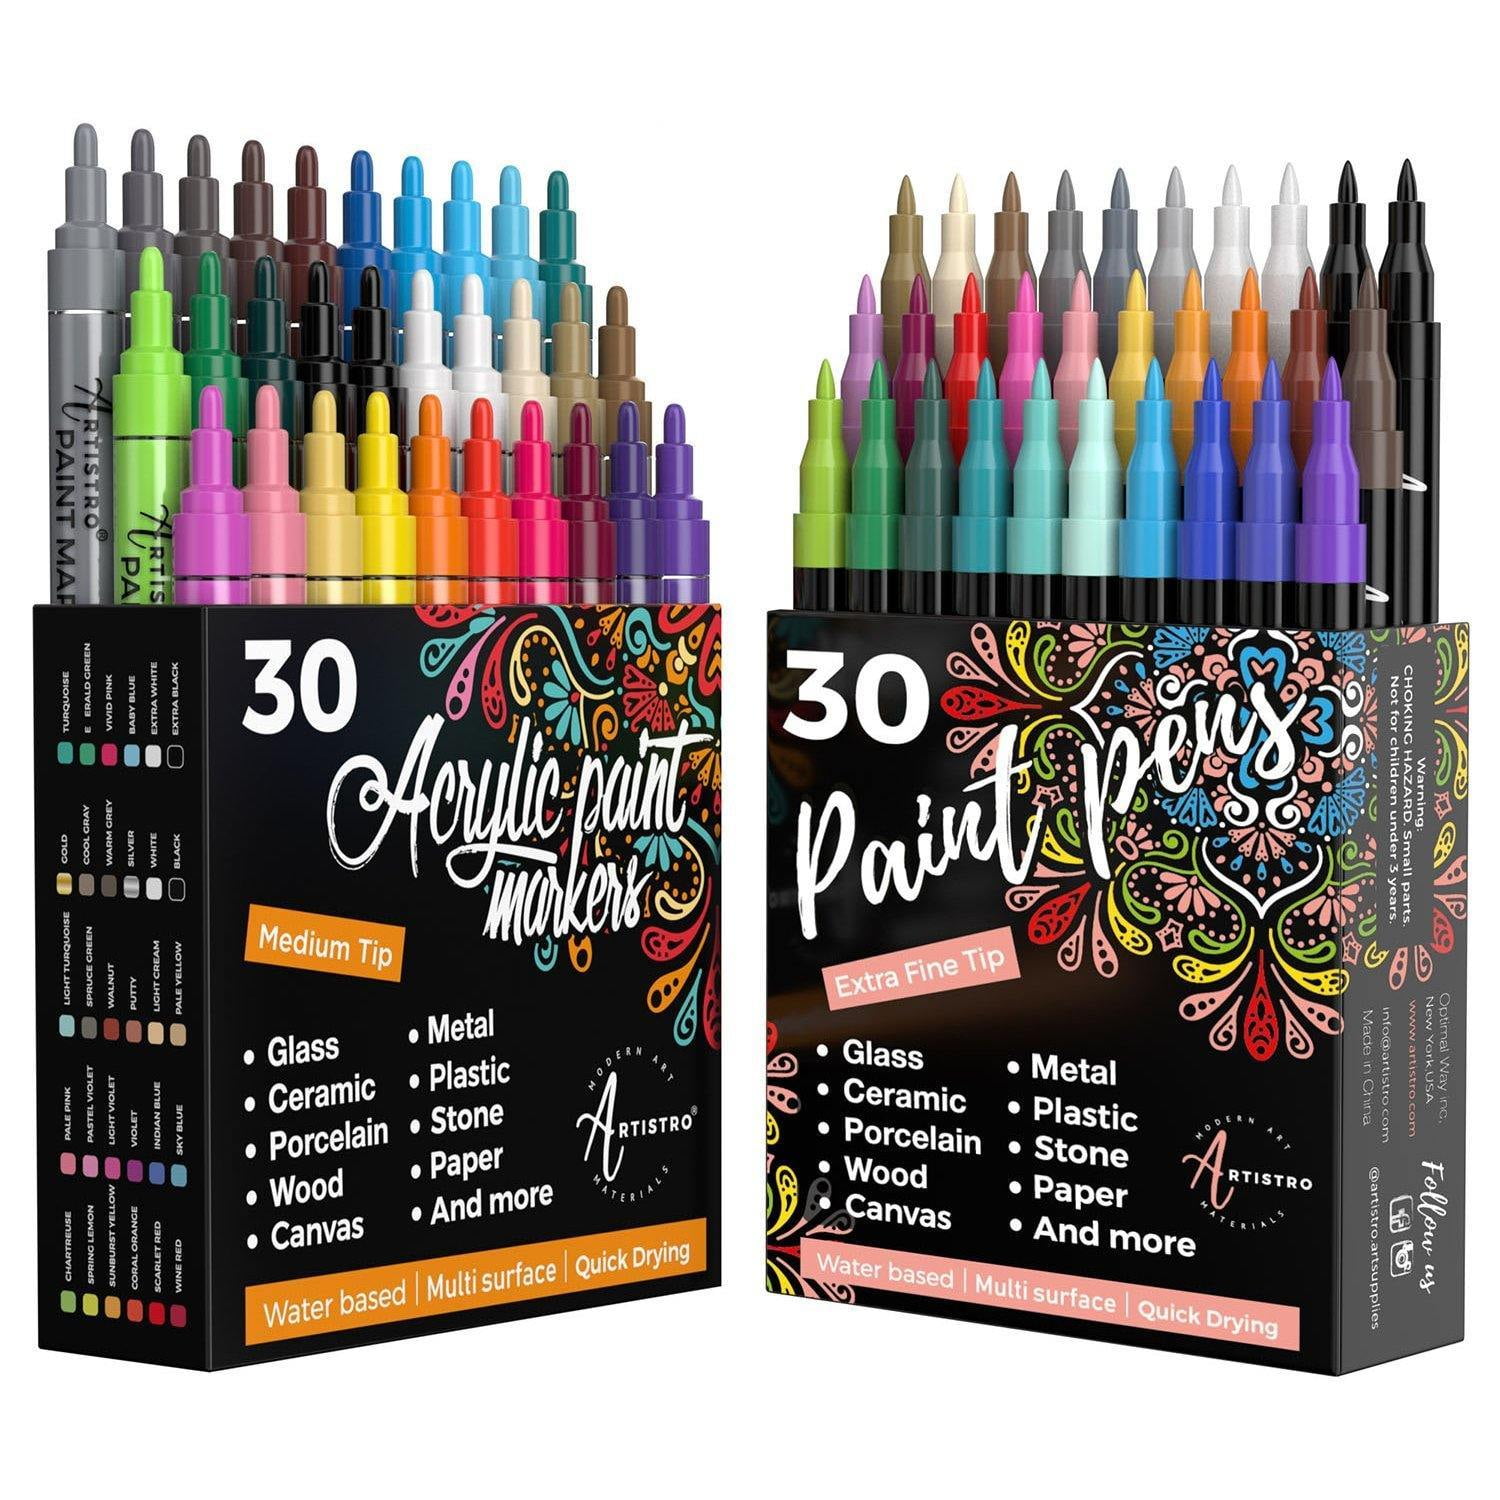 60 Artistro Markers for Art  30 Acrylic Extra Fine Tip Paint Pens